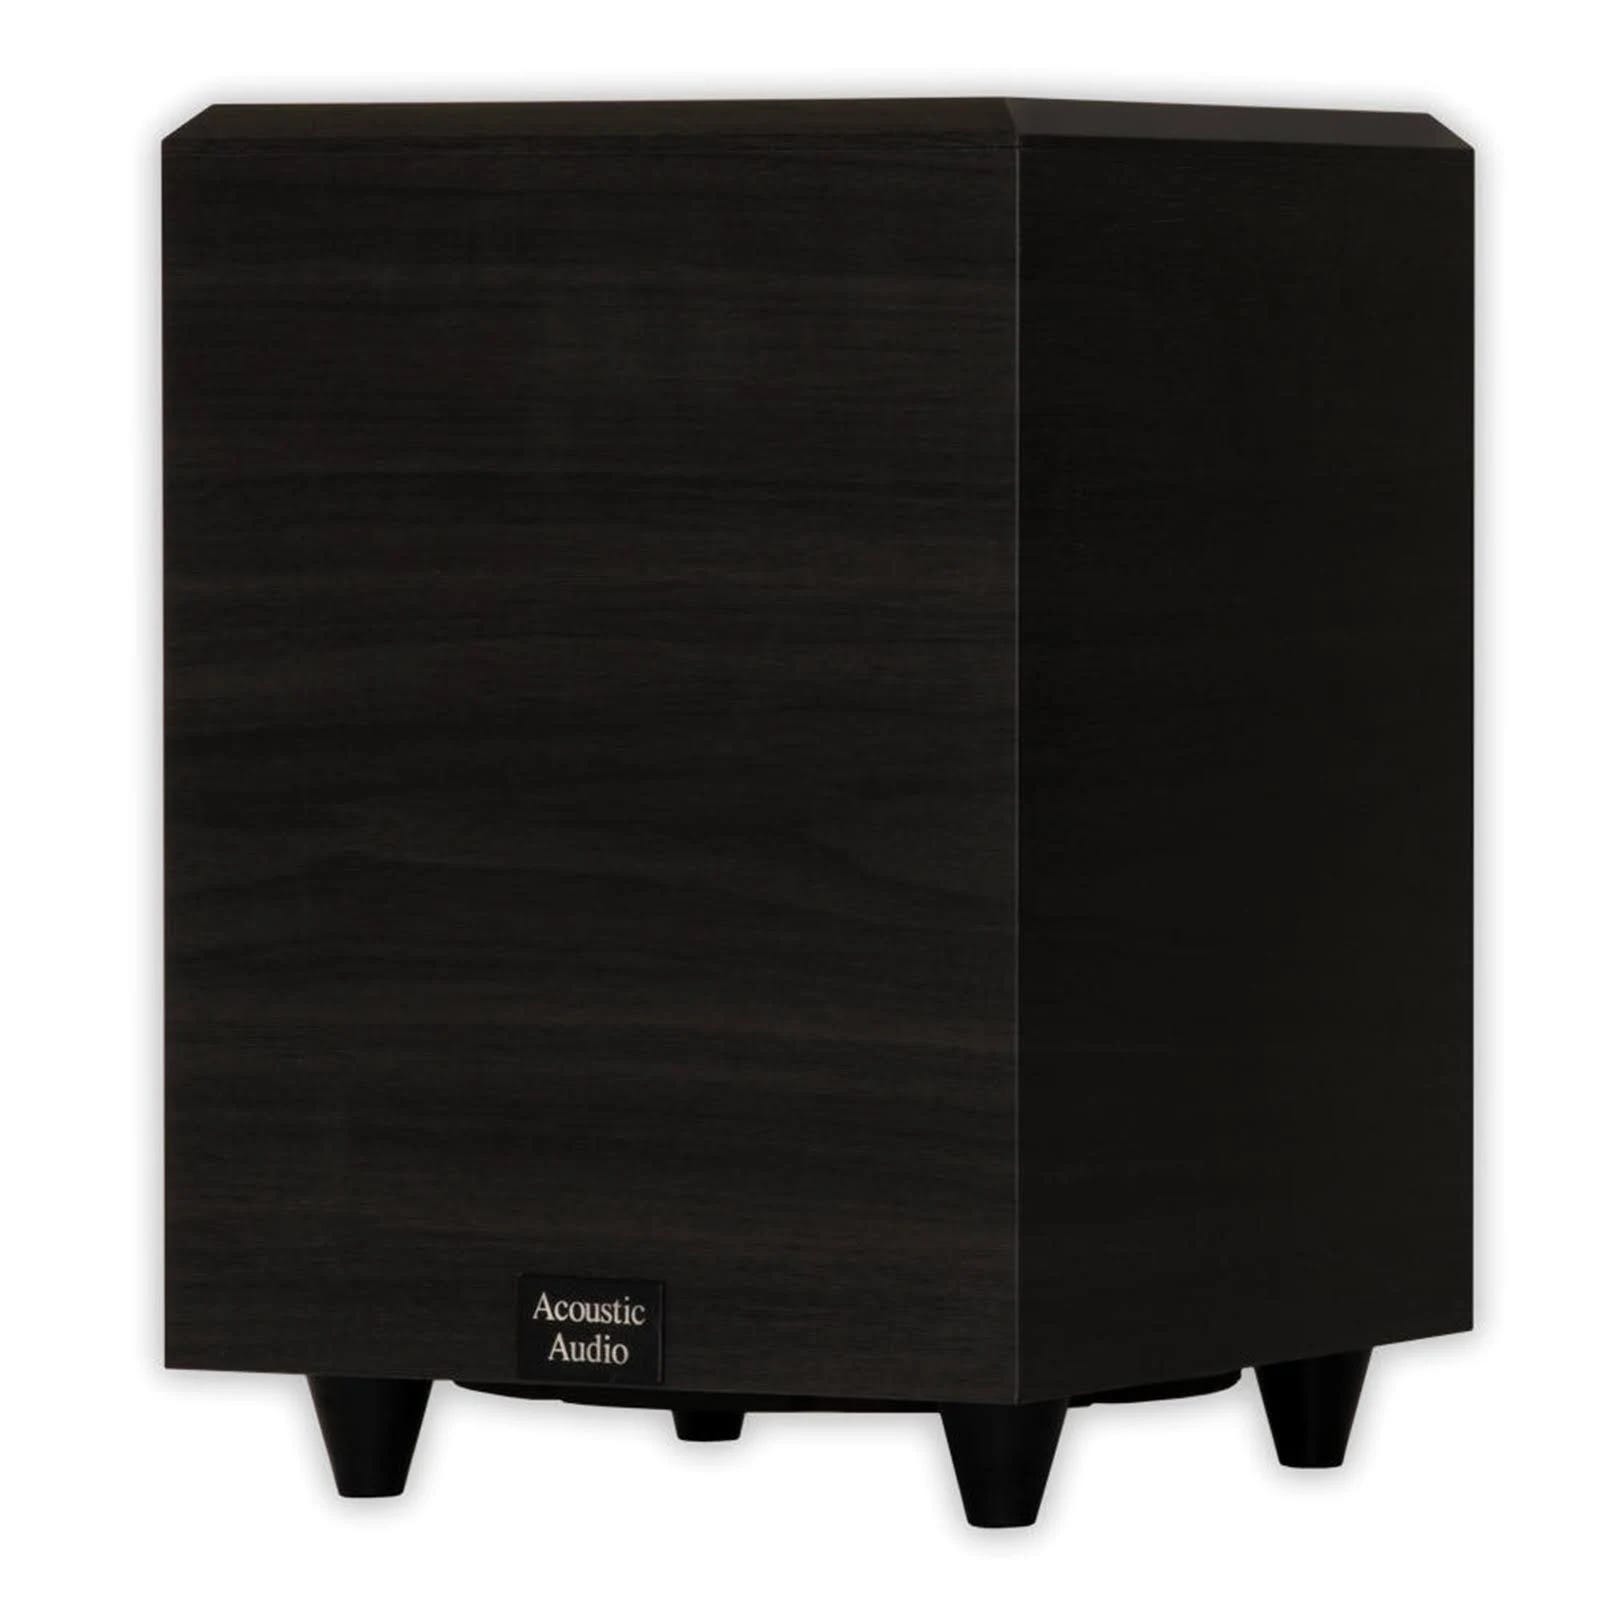 Acoustic Audio PSW-8 8-Inch Subwoofer for Home Theaters and Surround Sound Systems | Image